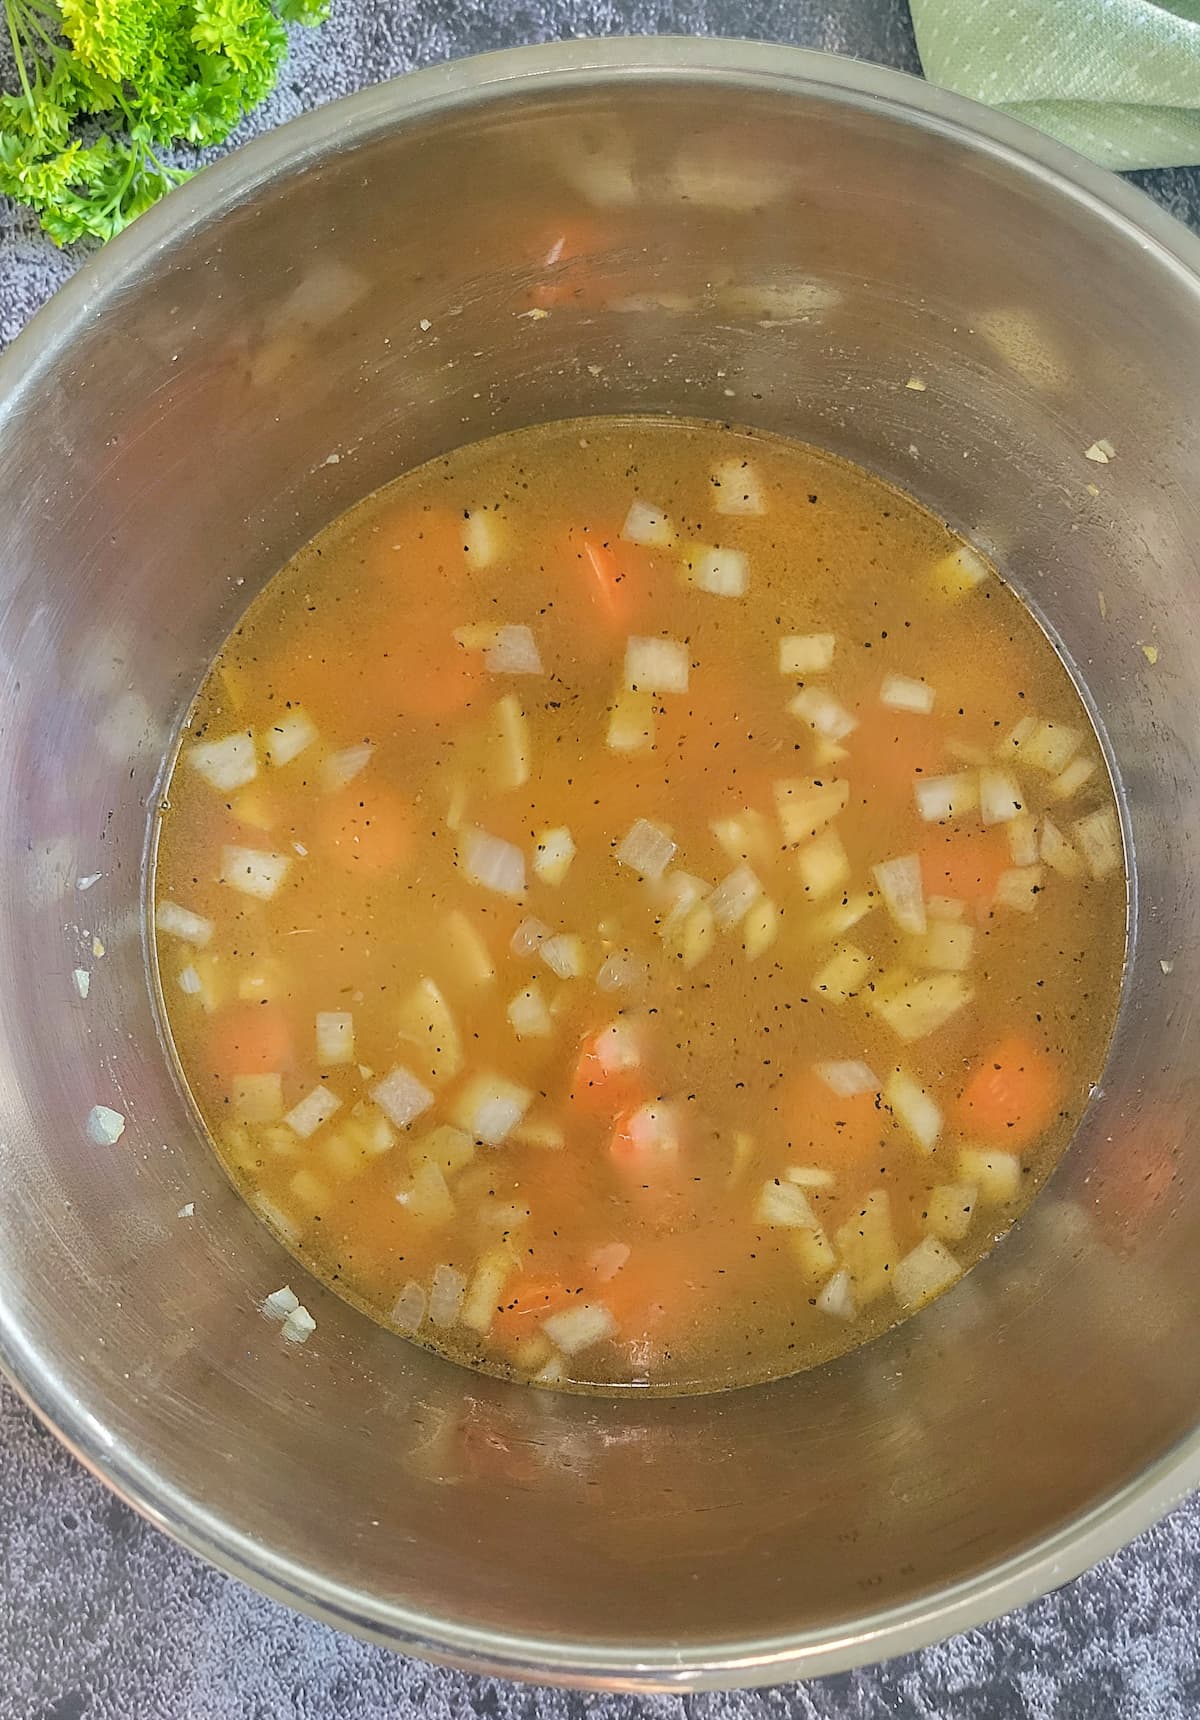 diced onions and carrot chunks in broth in a pot